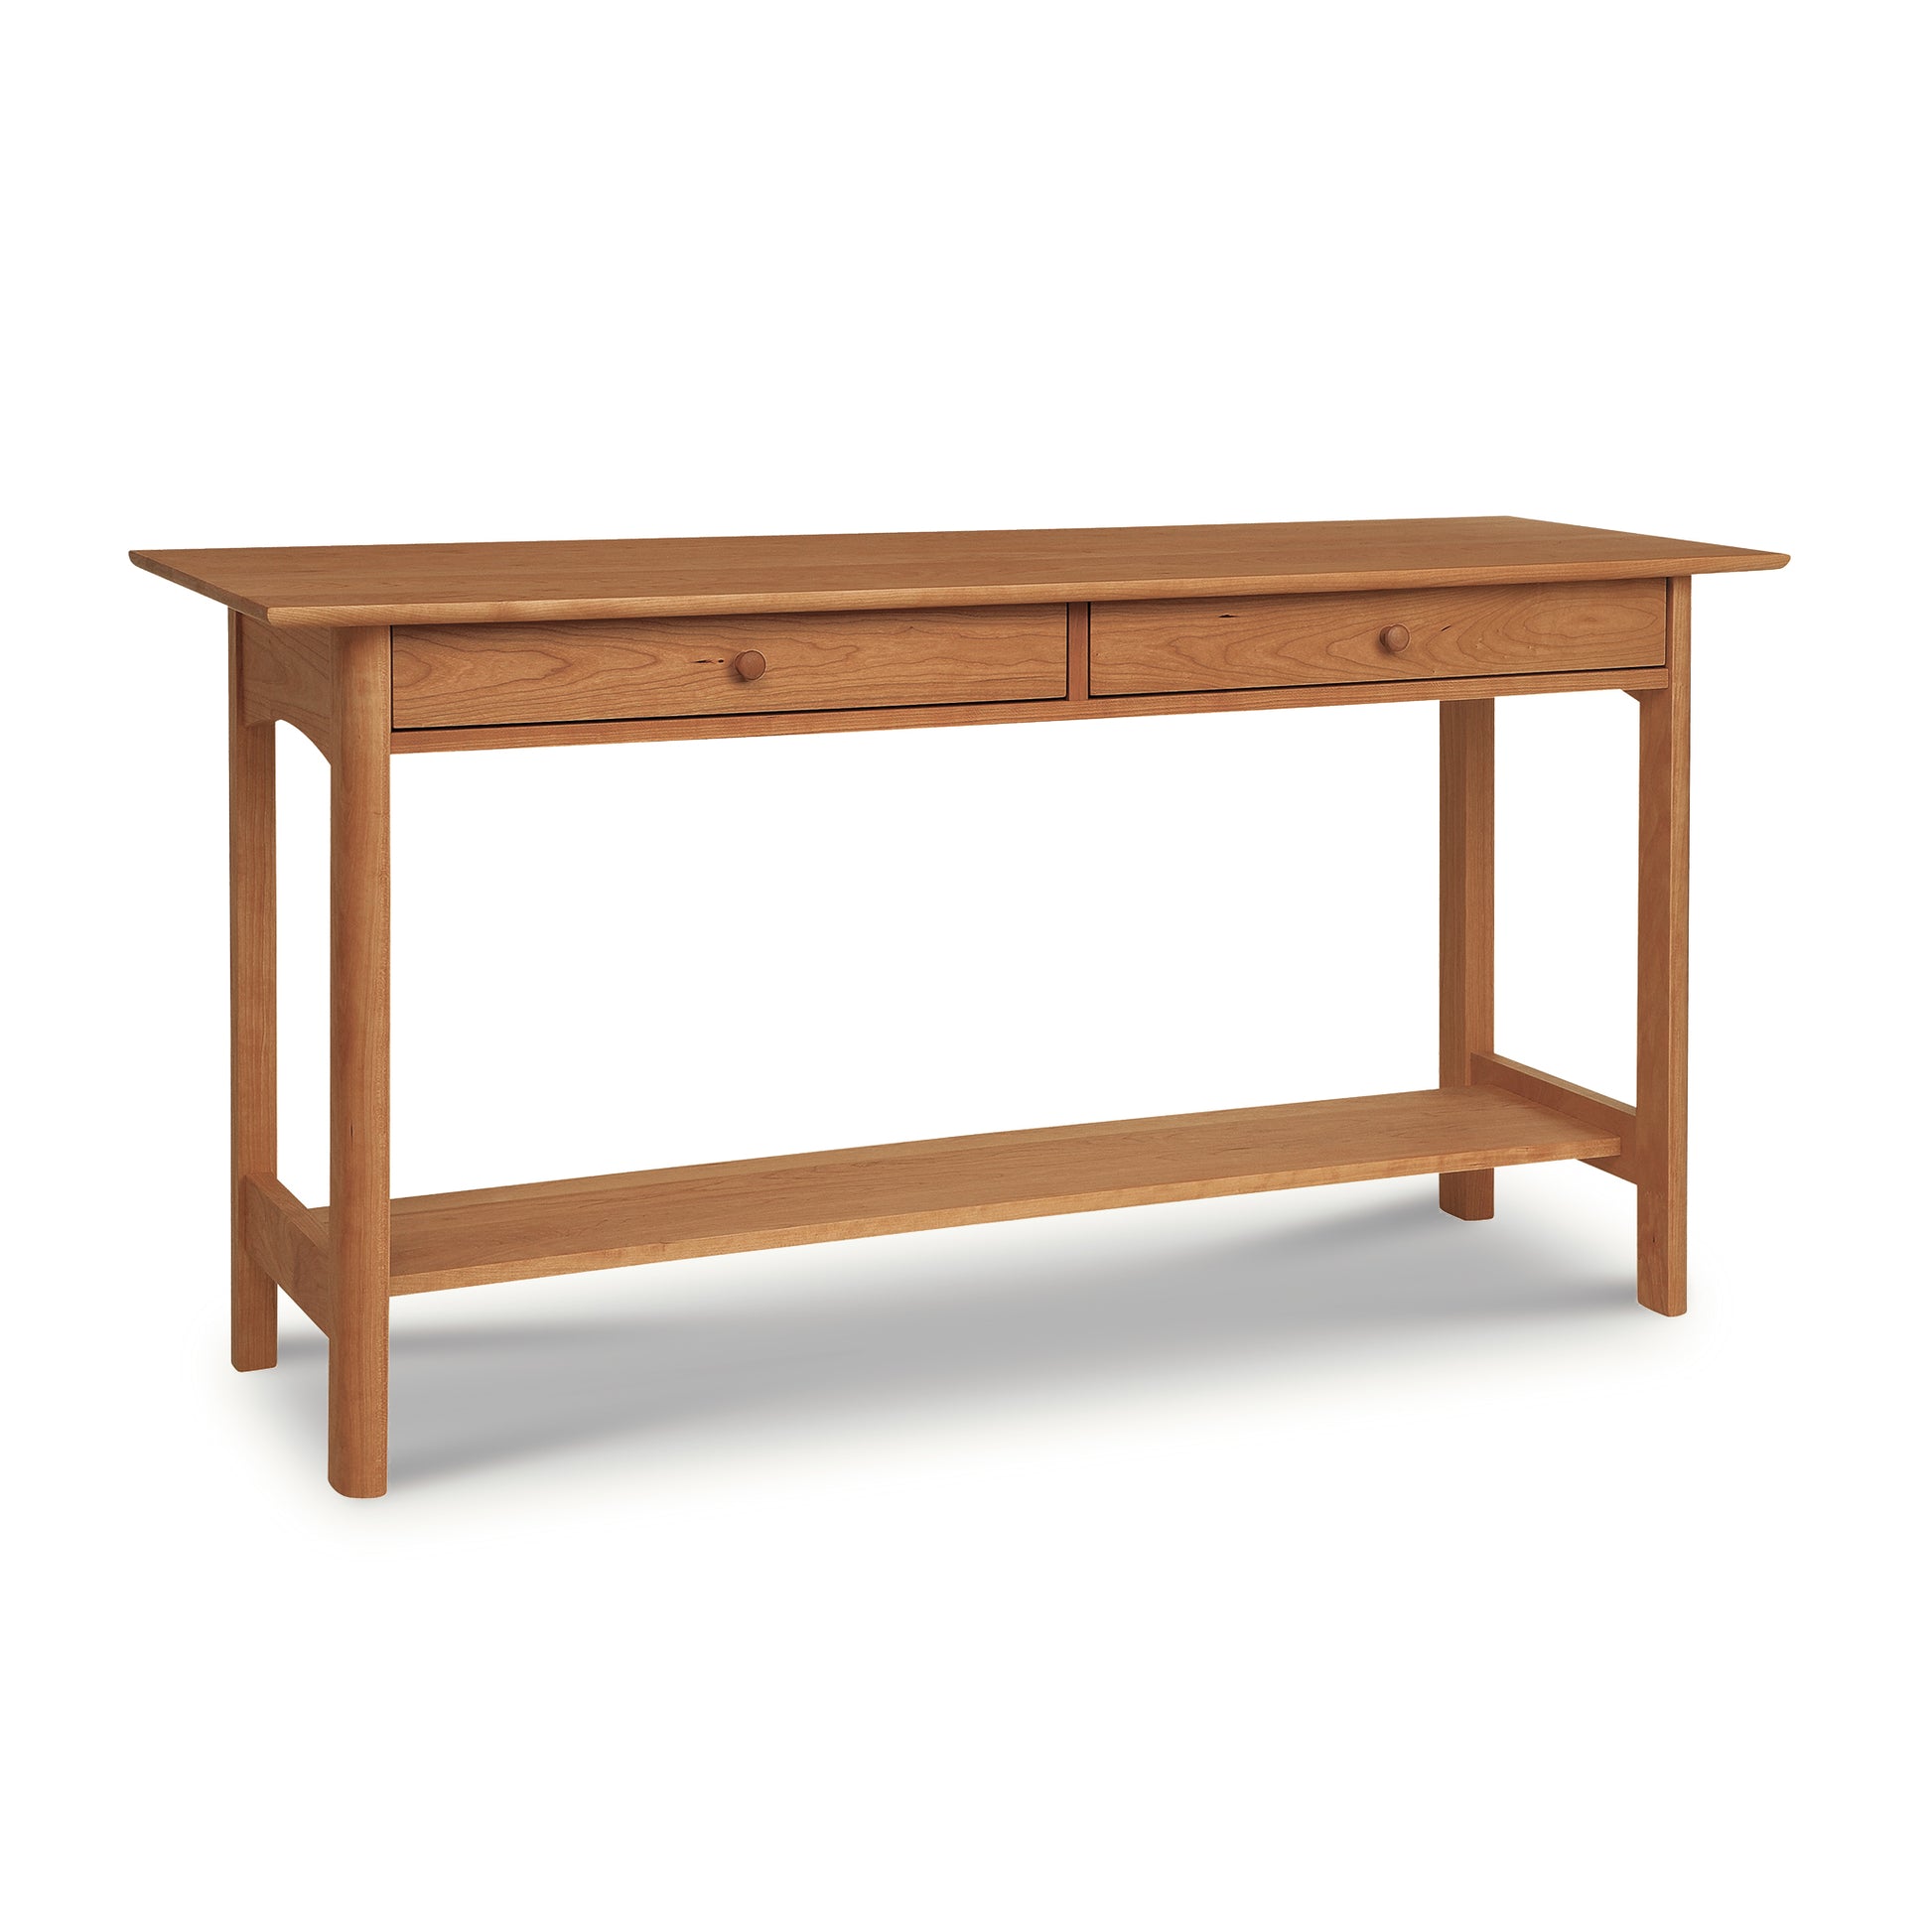 A Vermont Furniture Designs Heartwood Shaker 2-Drawer Console Table with a bottom shelf, set against a white background.